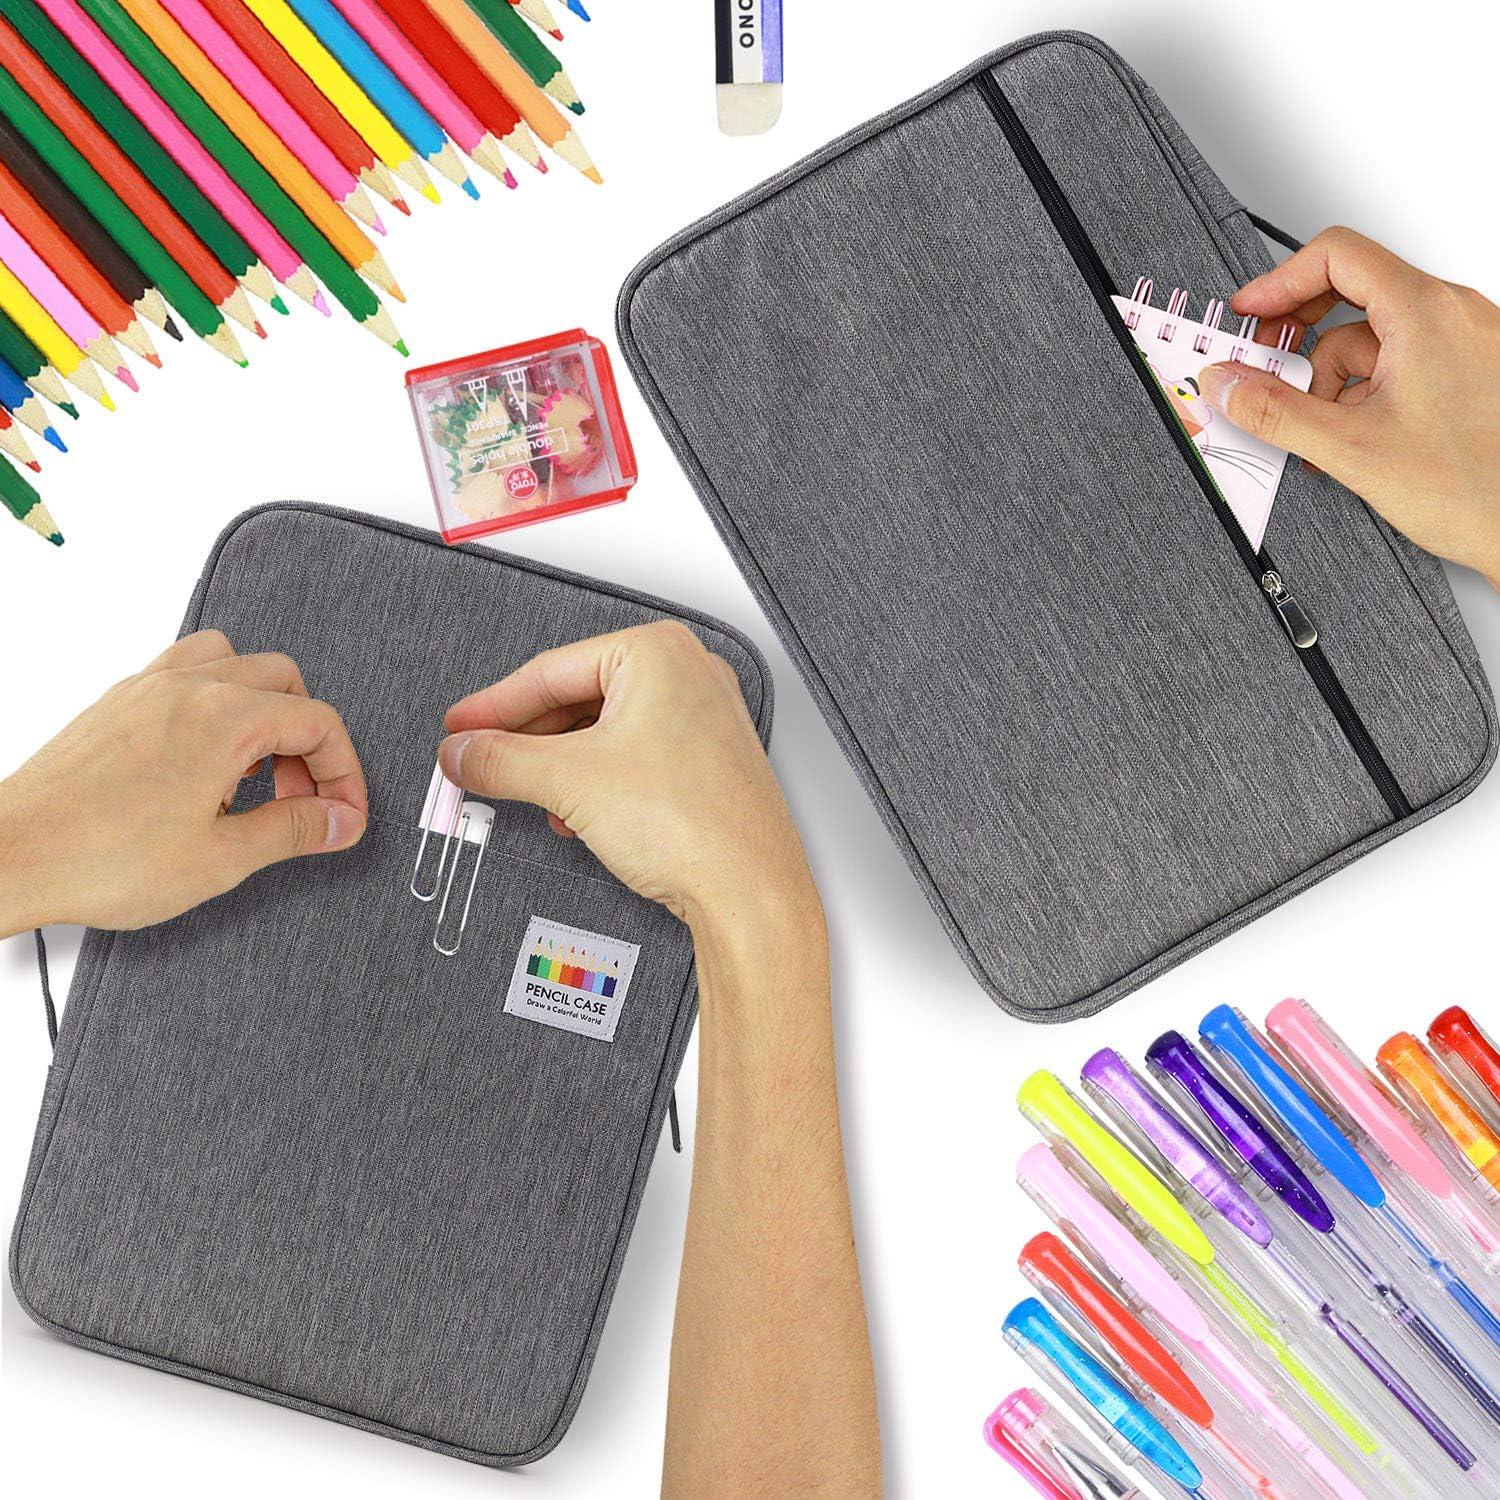 PU Leather Colored Pencil Case with Compartments-Handy Pencil Bags Large  for Watercolor Pencils, Ordinary Pencils 